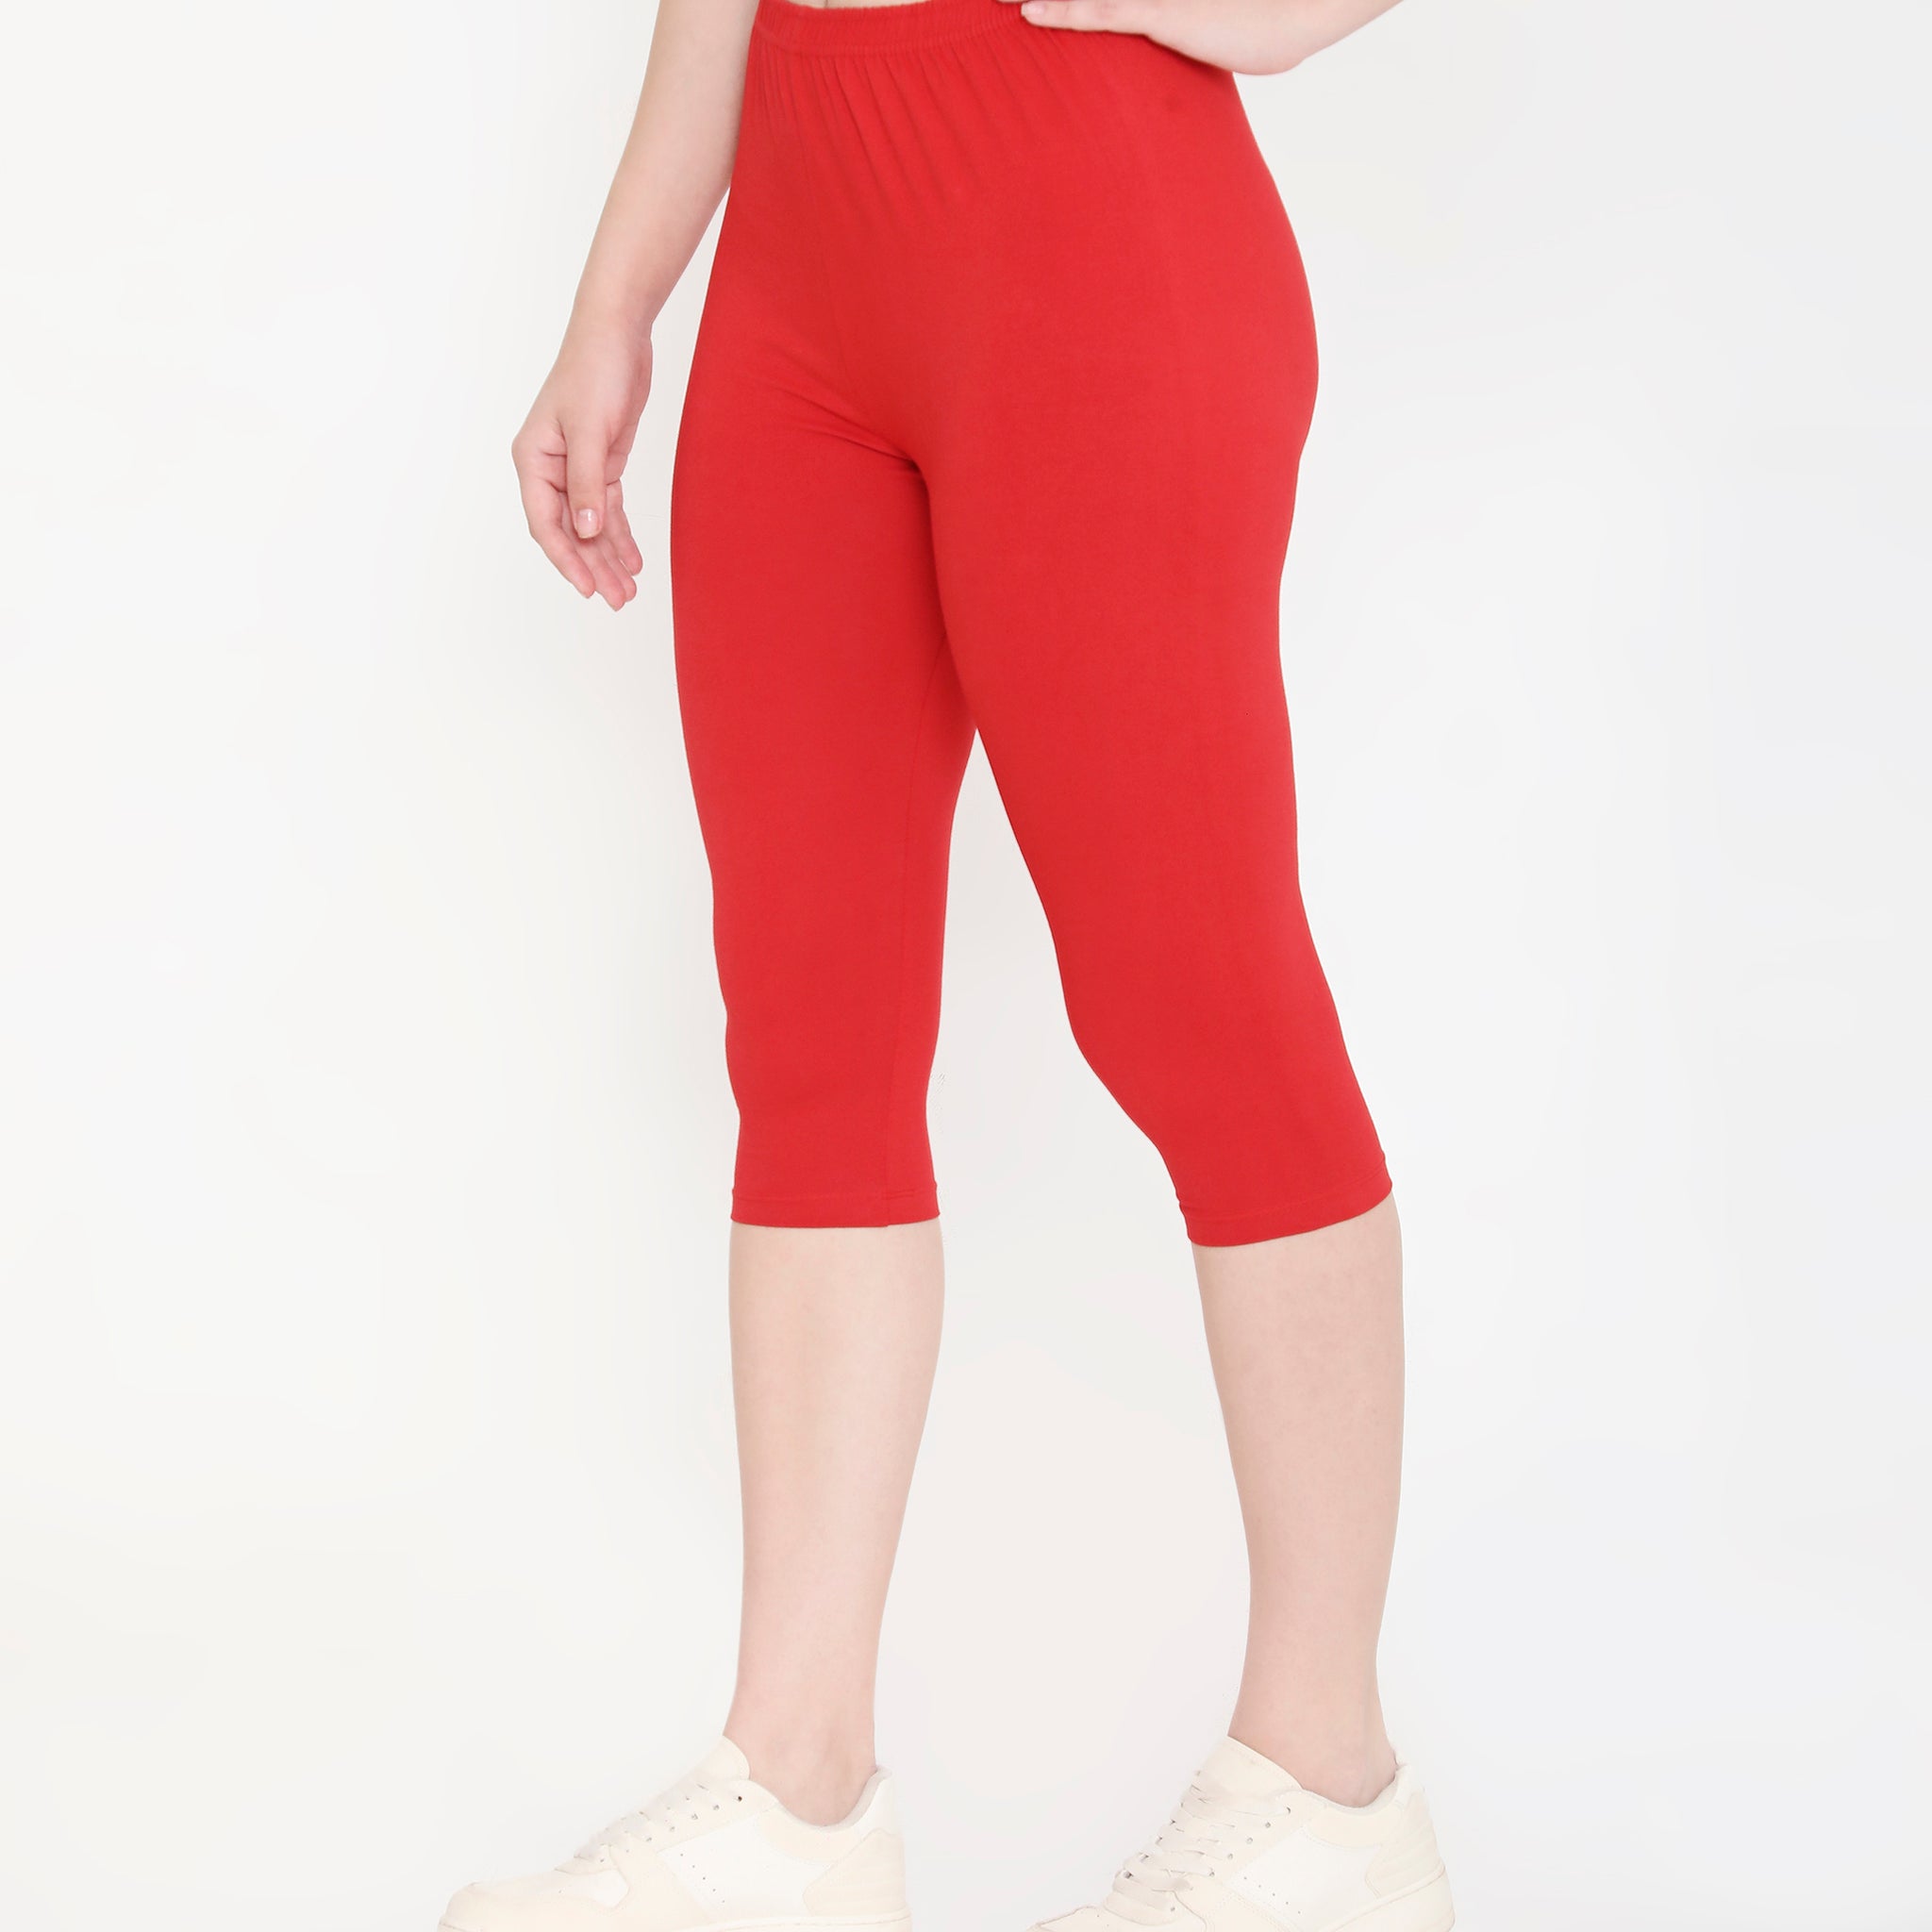 WOMEN SOLID RED SOFT COTTON EVERYDAY CAPRI